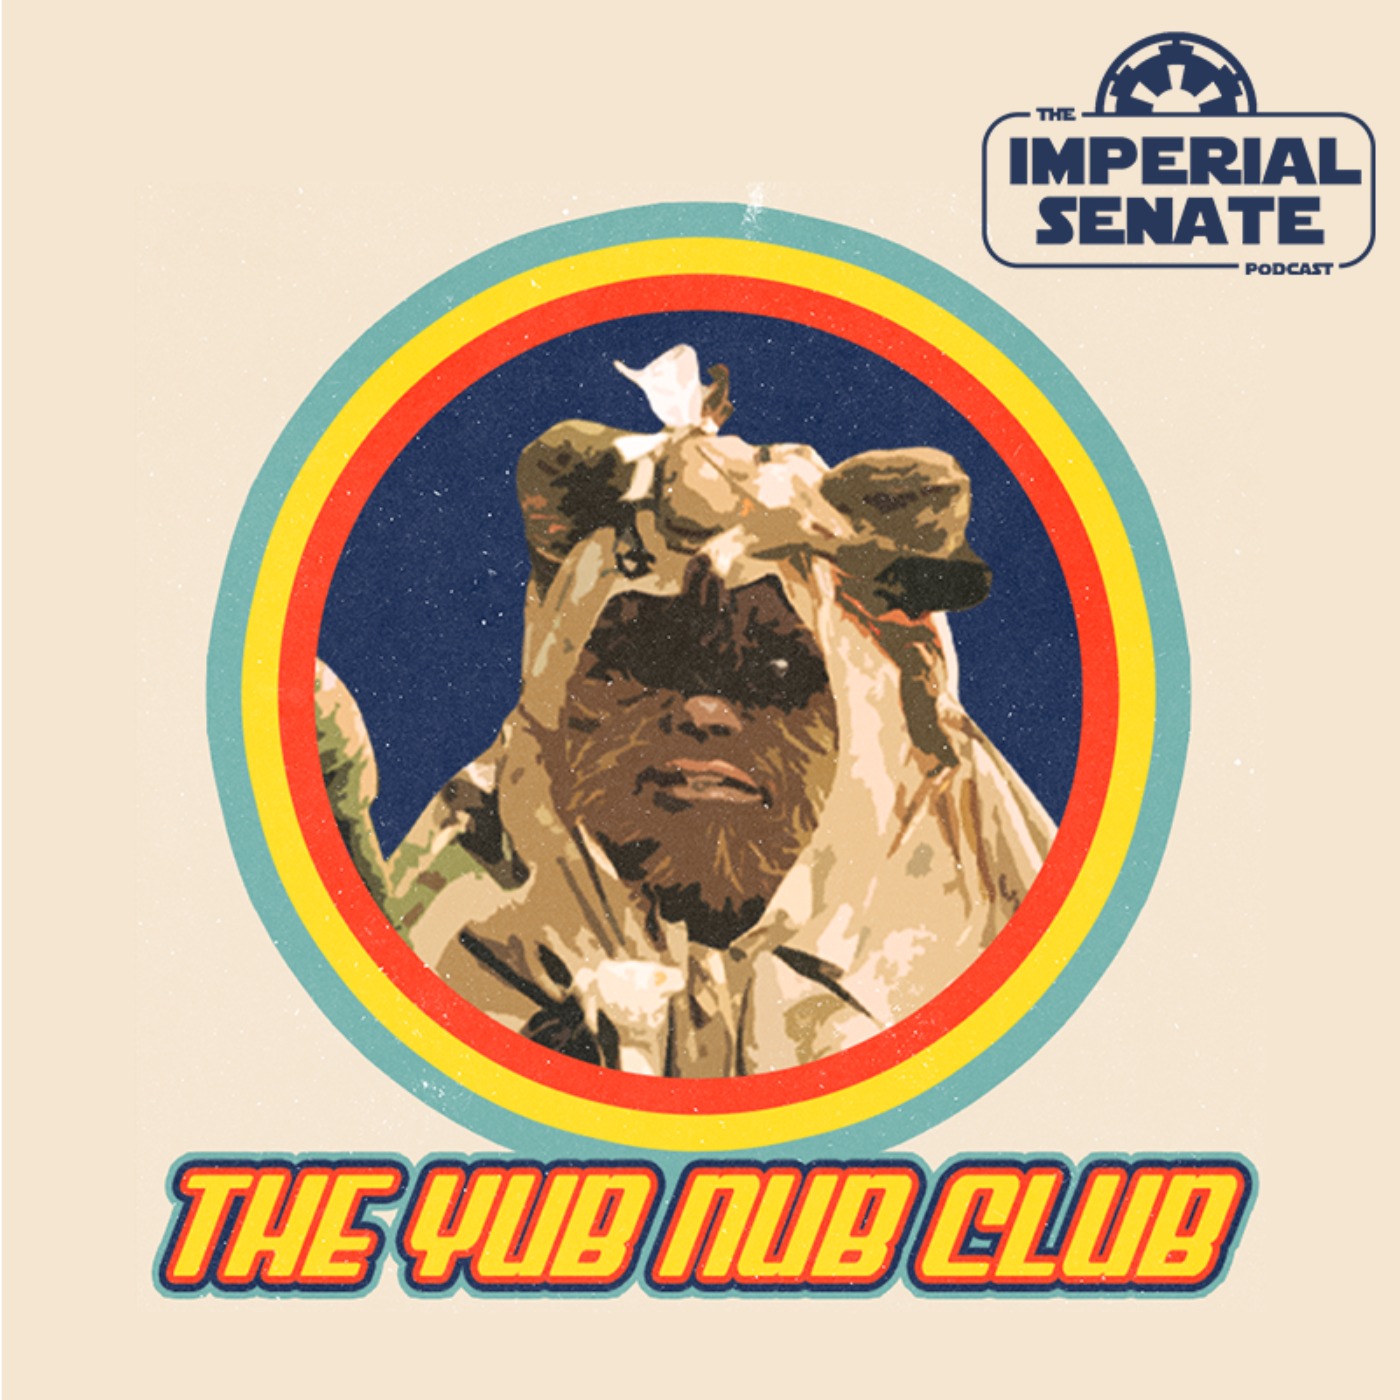 Yub Nub Club: Episode 0 - Hello, What Have We Here?